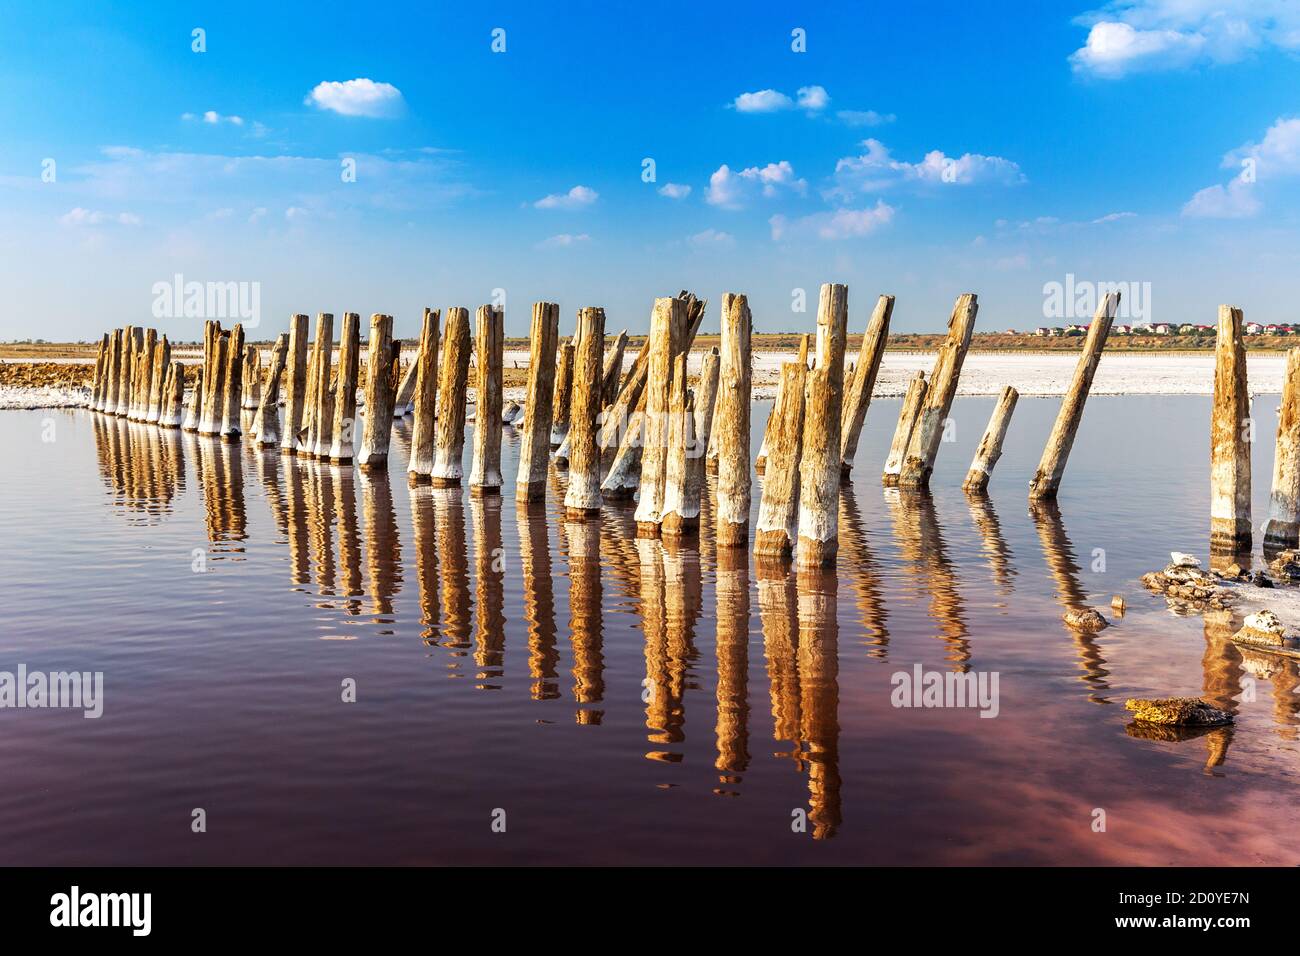 Kuyalnik in Odessa, Ukraine. The water has receded far into the result of the strong summer drought. Ecological catastrophy. The destruction of nature Stock Photo